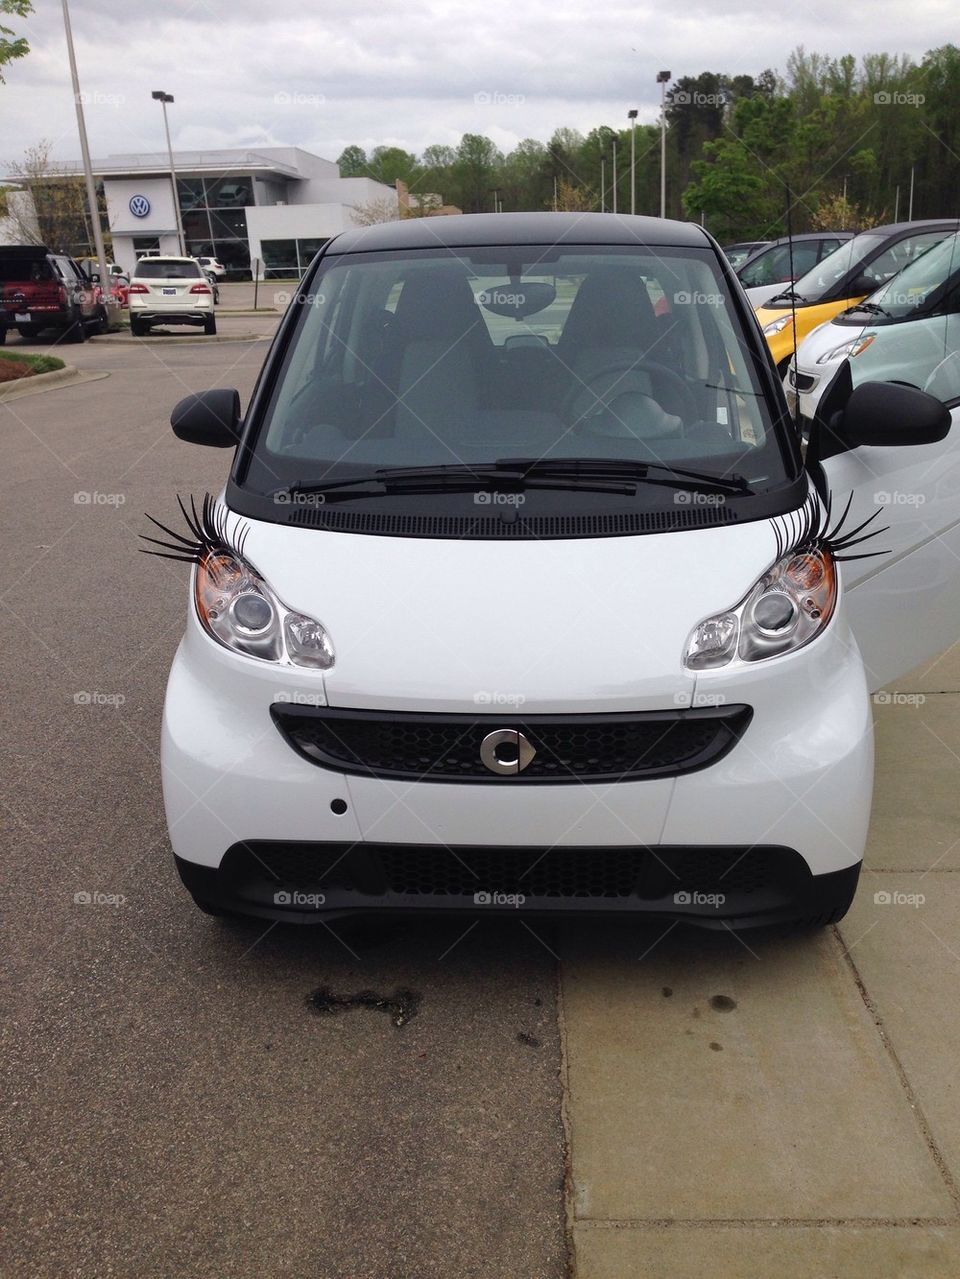 Smart car with eye lashes